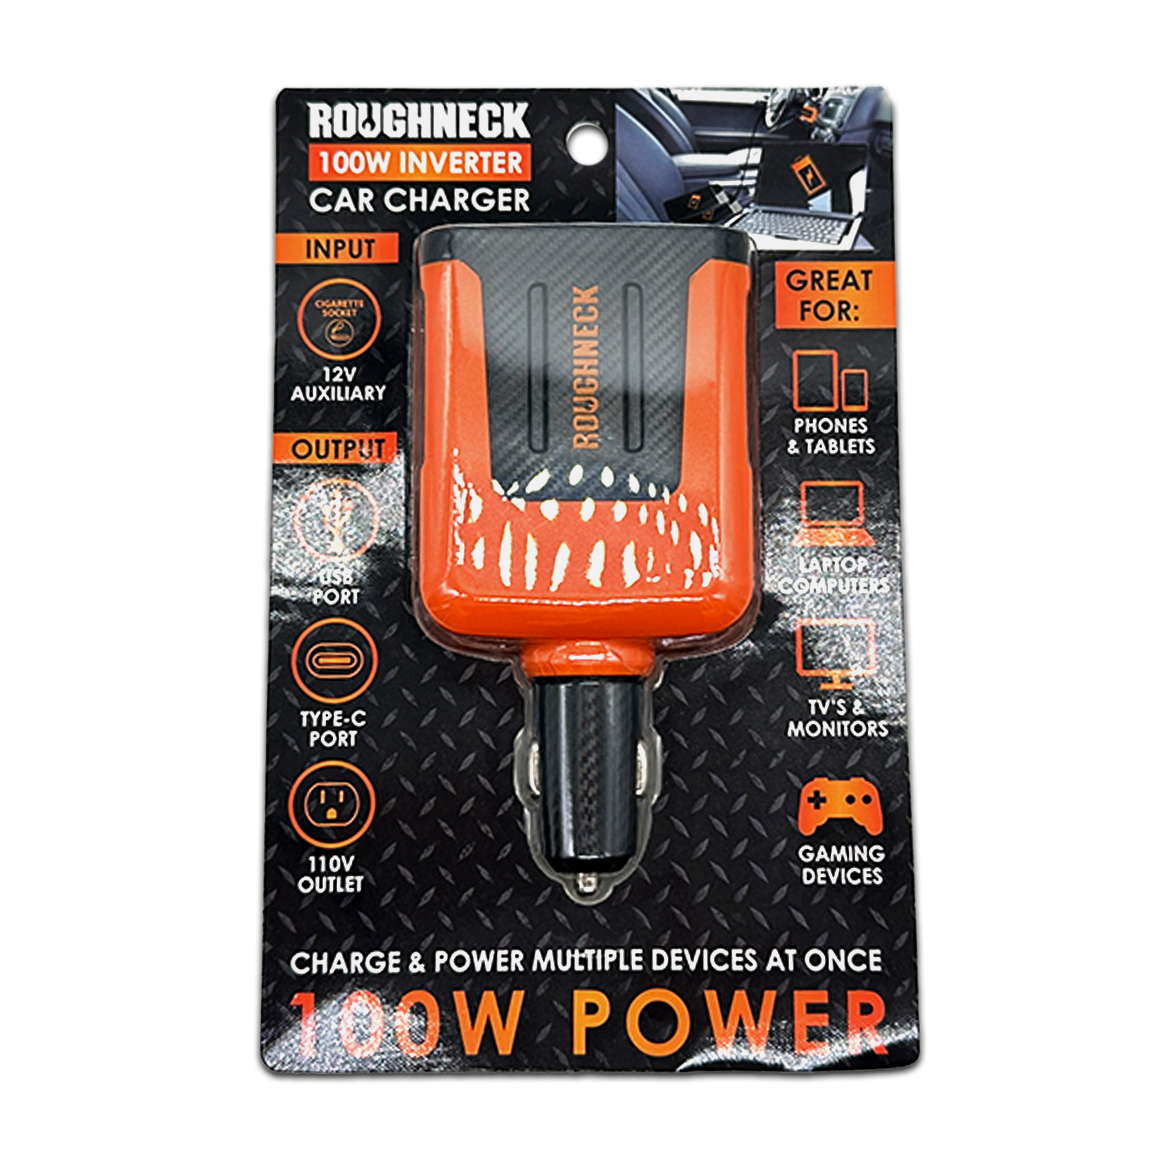 ITEM NUMBER 023861 ROUGHNECK DC CHARGER CONVERTER 4 PIECES PER DISPLAY